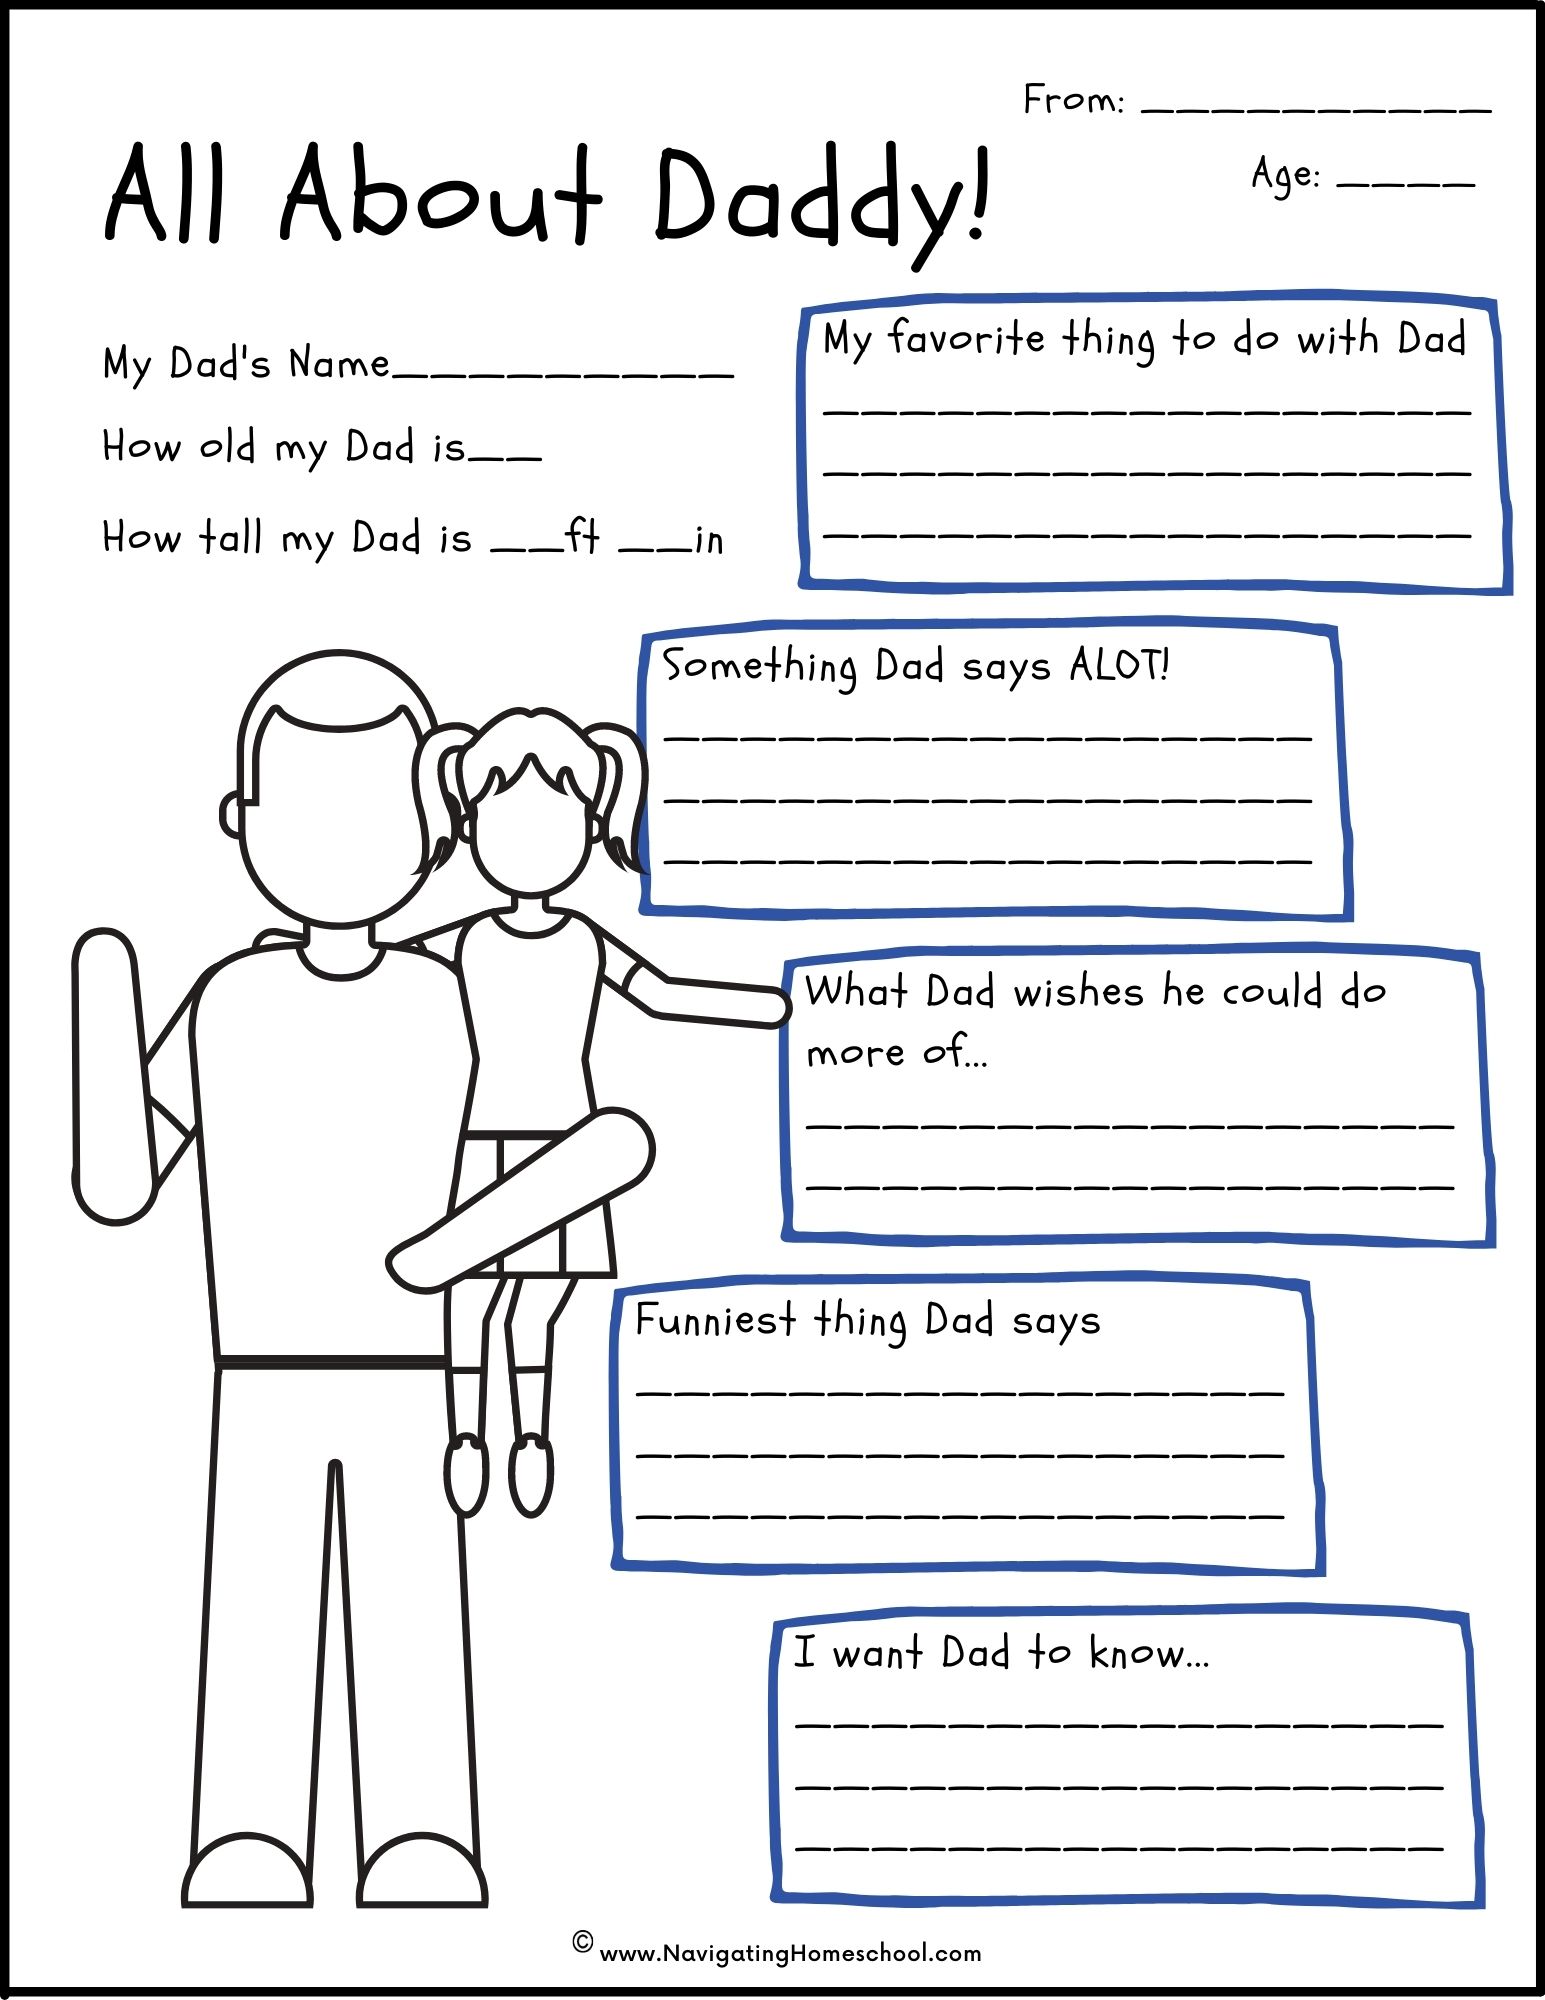 all-about-daddy-free-printable